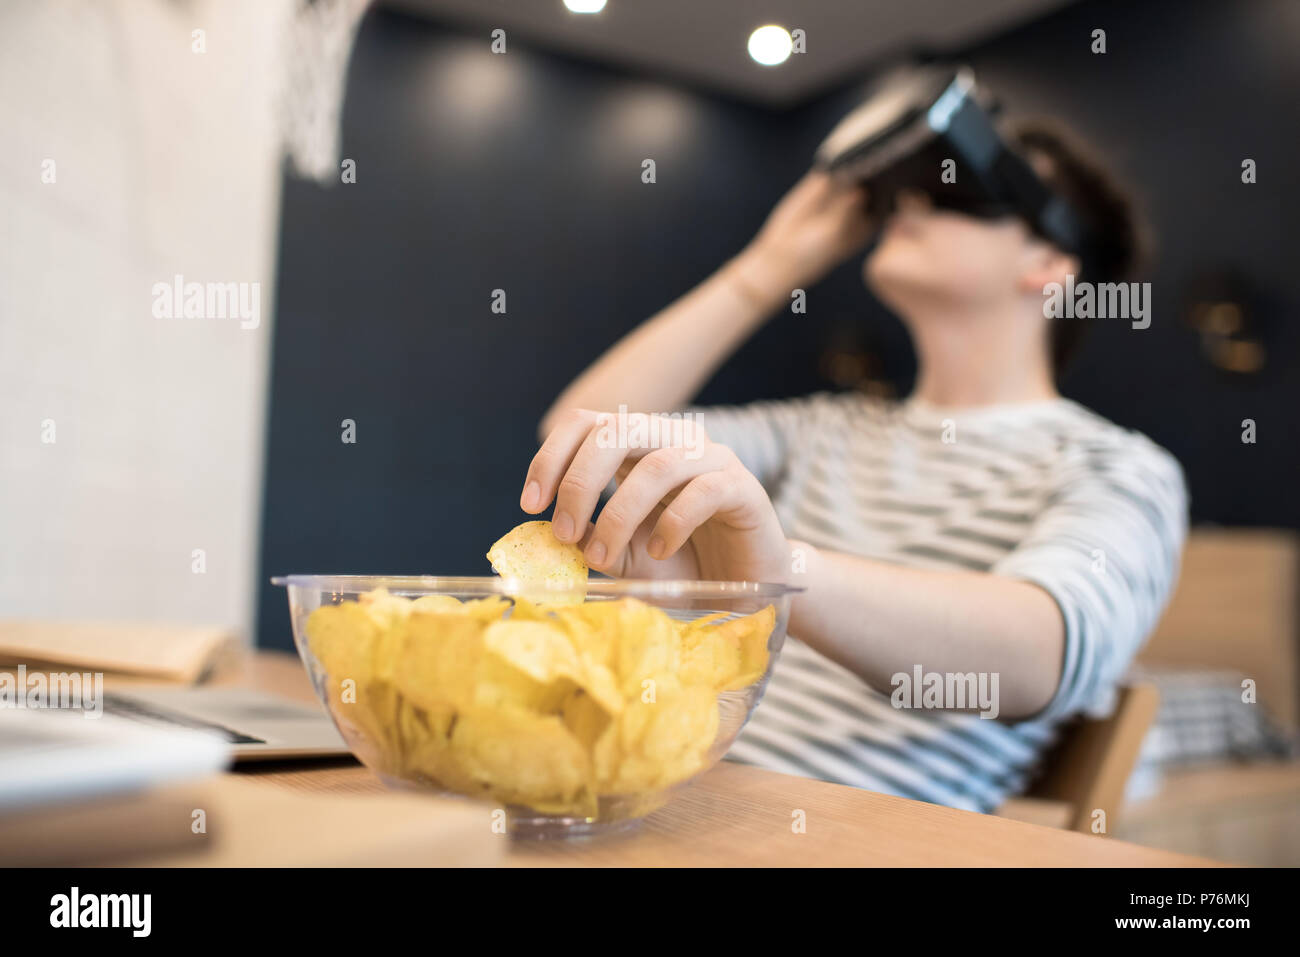 Young male sitting at home reaching for potato chip in bowl while focused on using virtual reality headset. Stock Photo